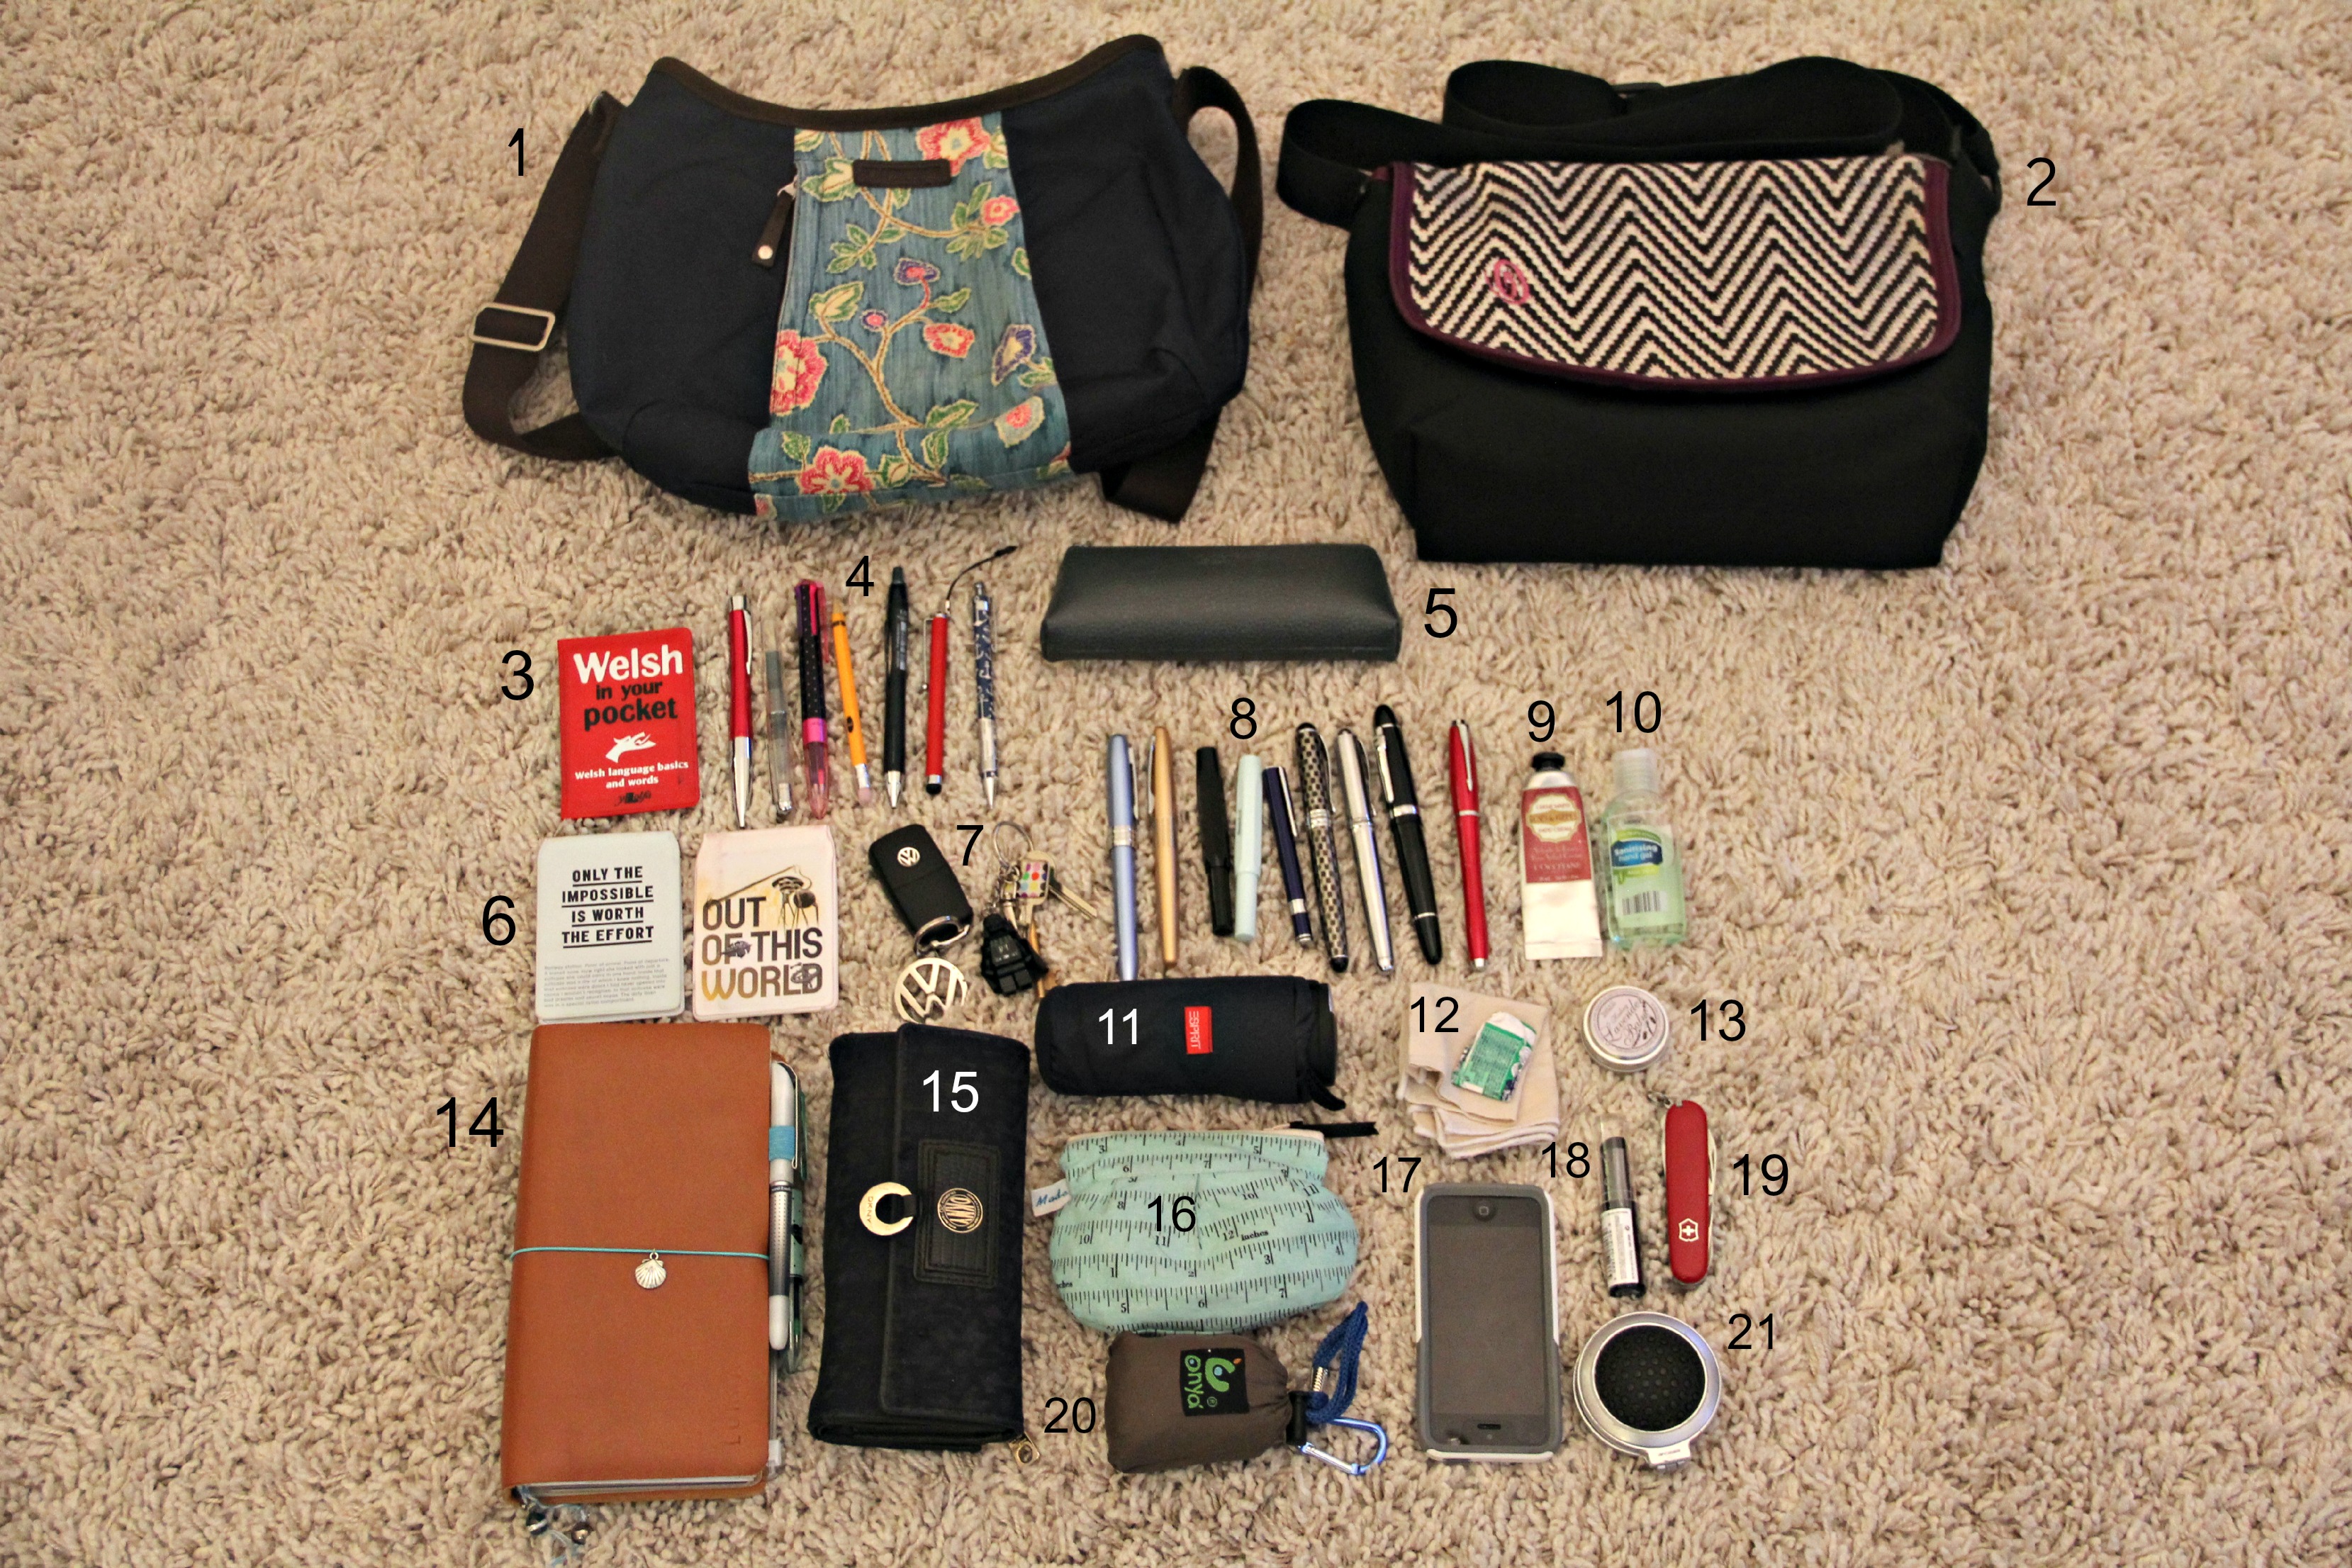 WHAT'S IN MY BAG?